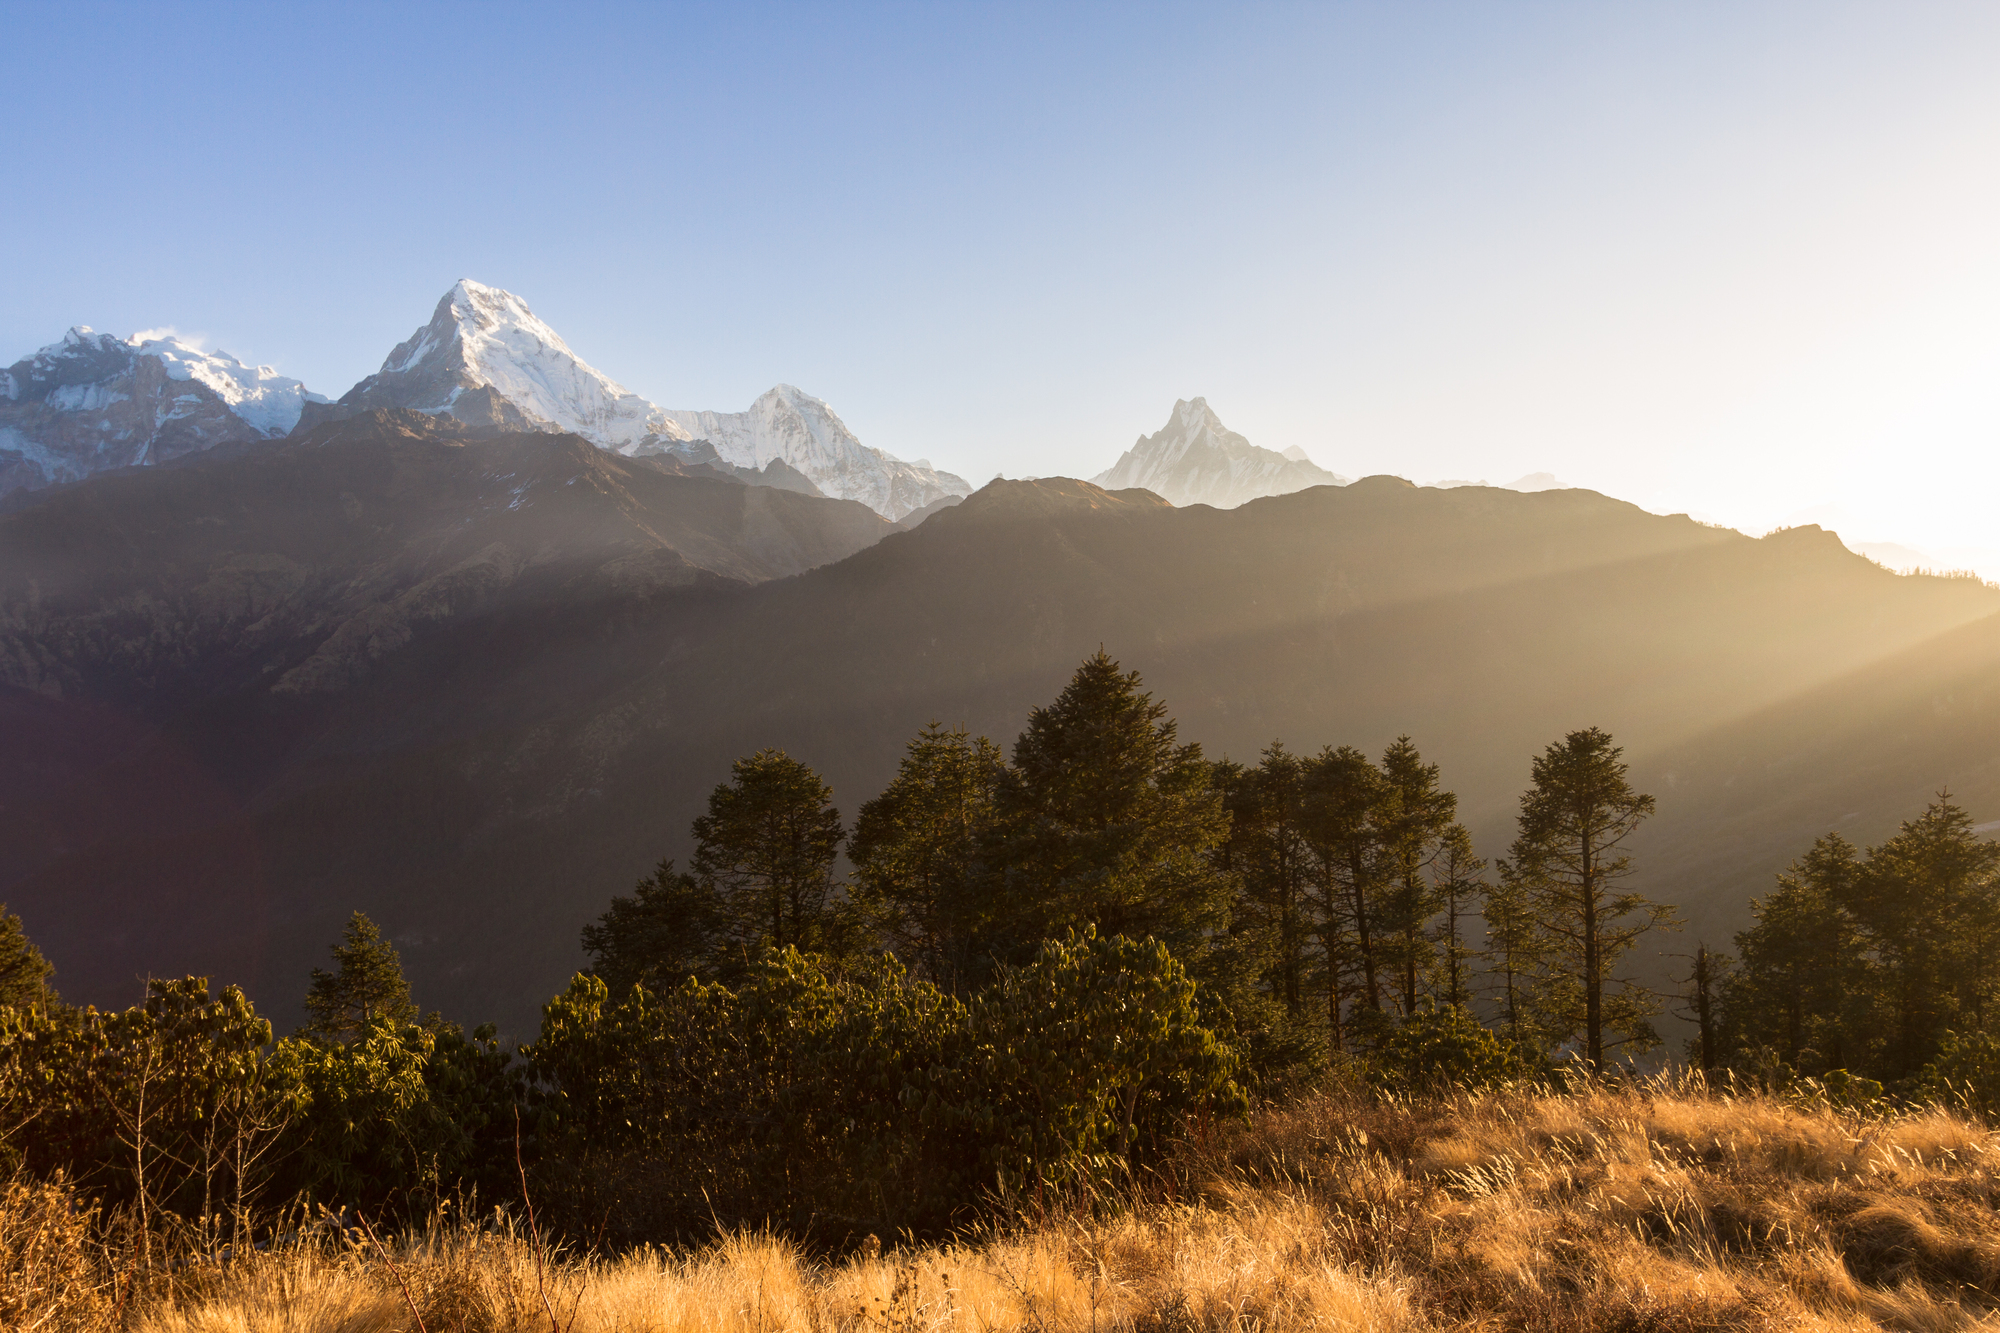 Sunrise from Poon Hill, Nepal - By Mountain People